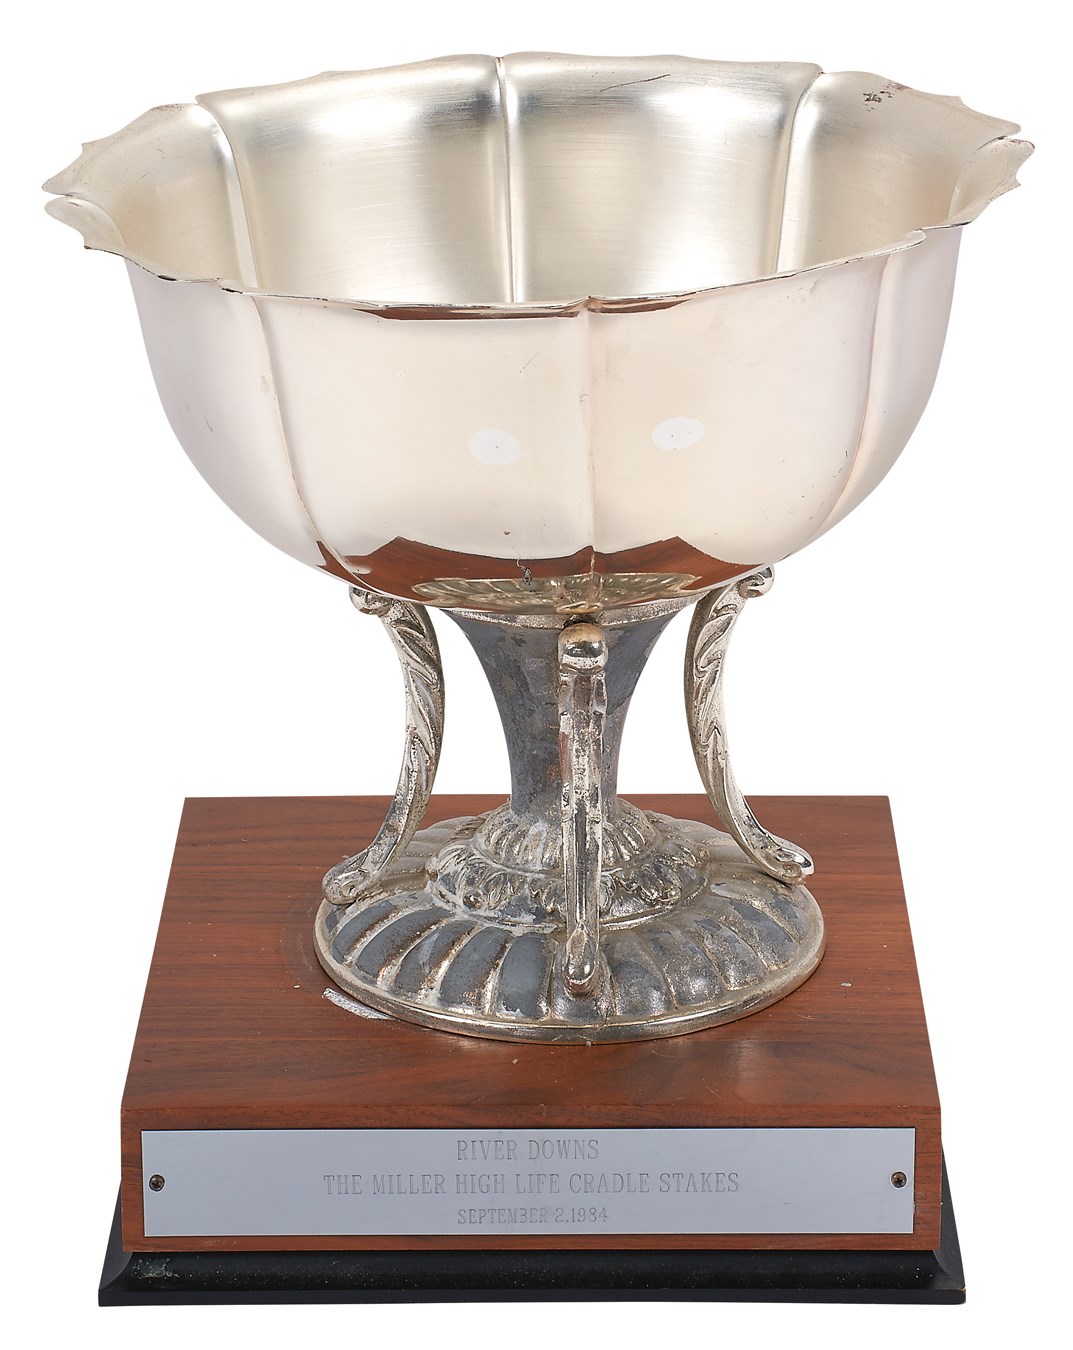 - "Spend A Buck" 1984 Cradle Stakes Trophy